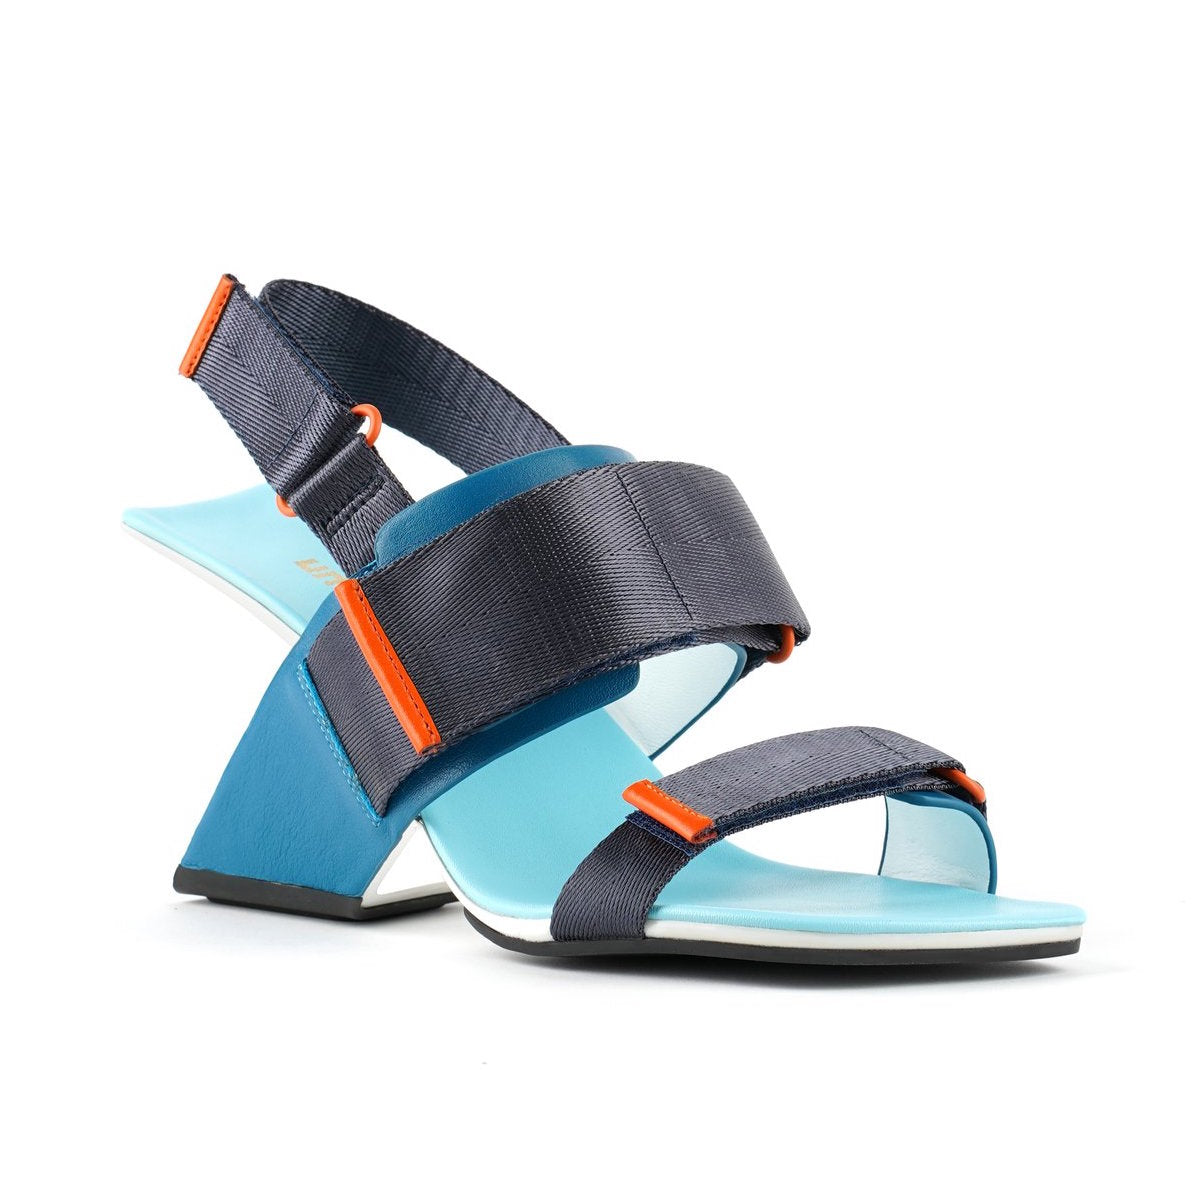 Outer front view of the united nude loop run high heel sandal. This sandal is blue with a black back strap, a black strap over the instep, and a black strap over the toes.